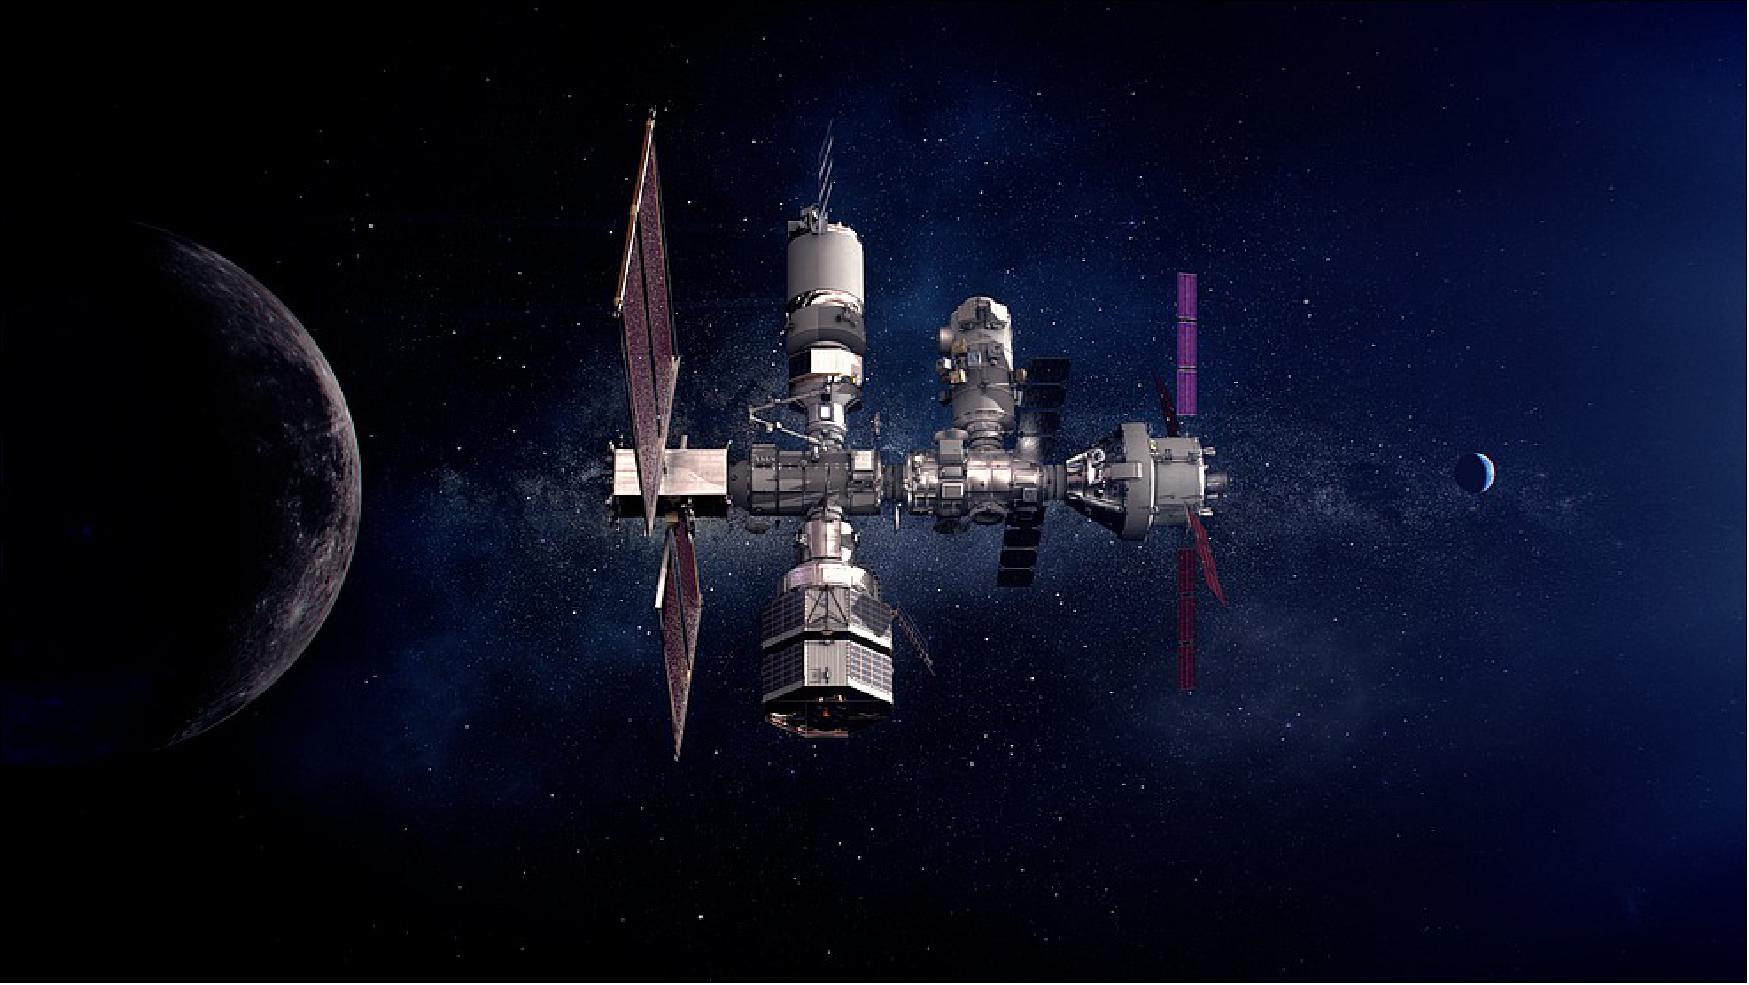 Figure 5: A full view of Gateway that includes elements from international partners. Built with commercial and international partners, the Gateway is critical to sustainable lunar exploration and will serve as a model for future missions to Mars (image credit: NASA)